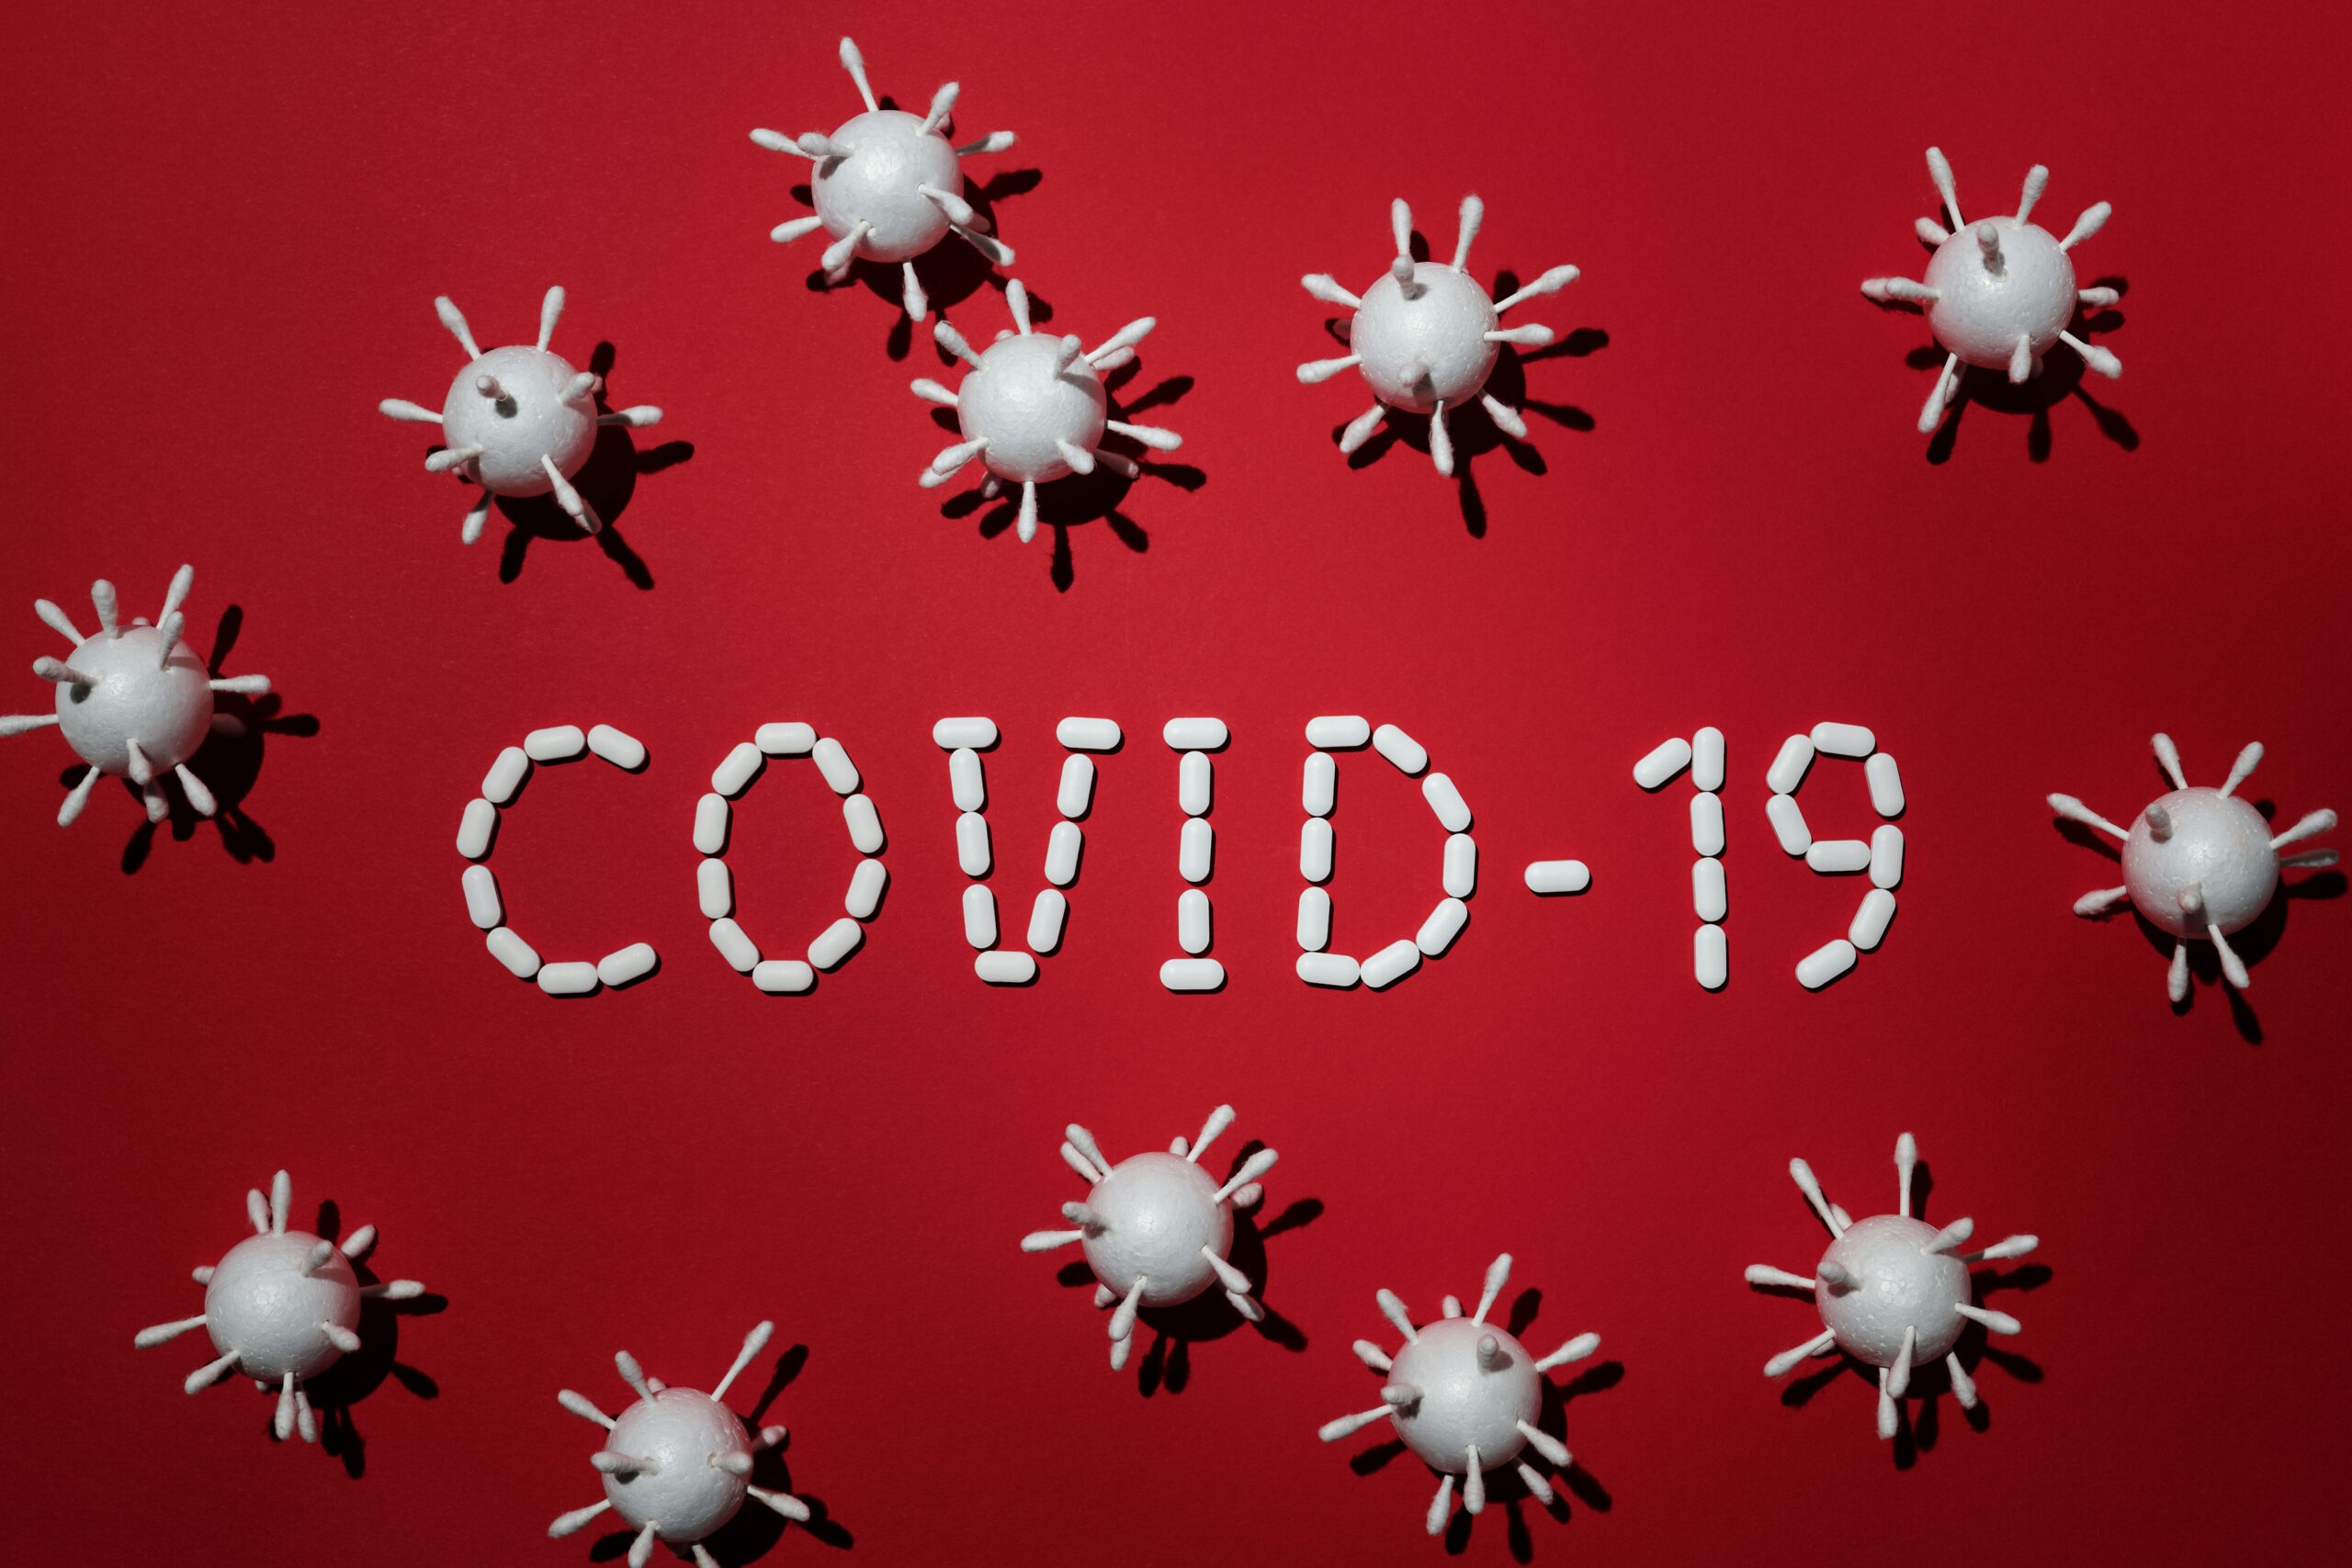 COVID-19 emergency room visits, deaths are up.